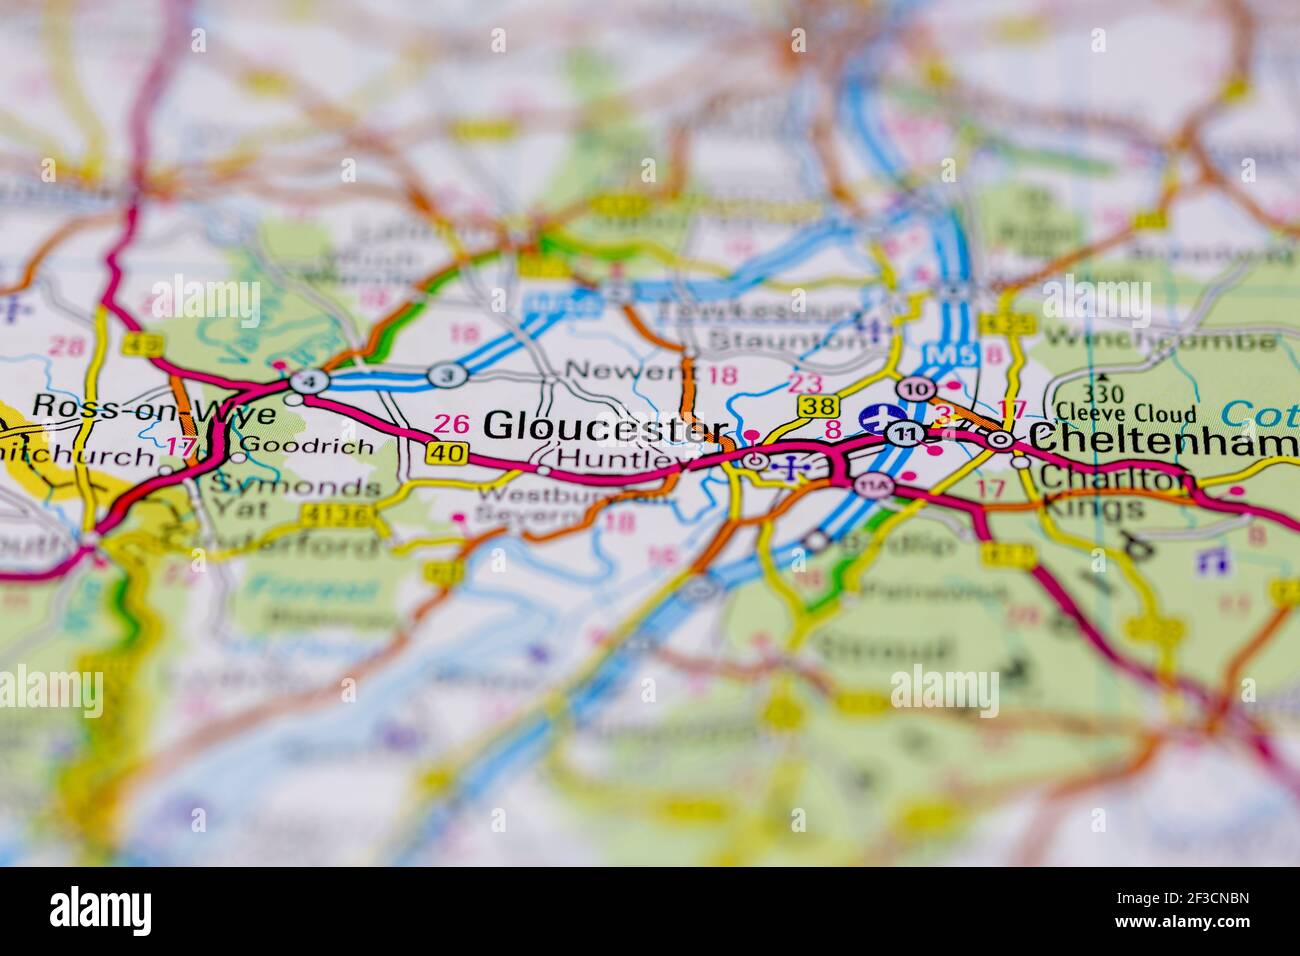 Gloucester Shown on a geography map or road map Stock Photo